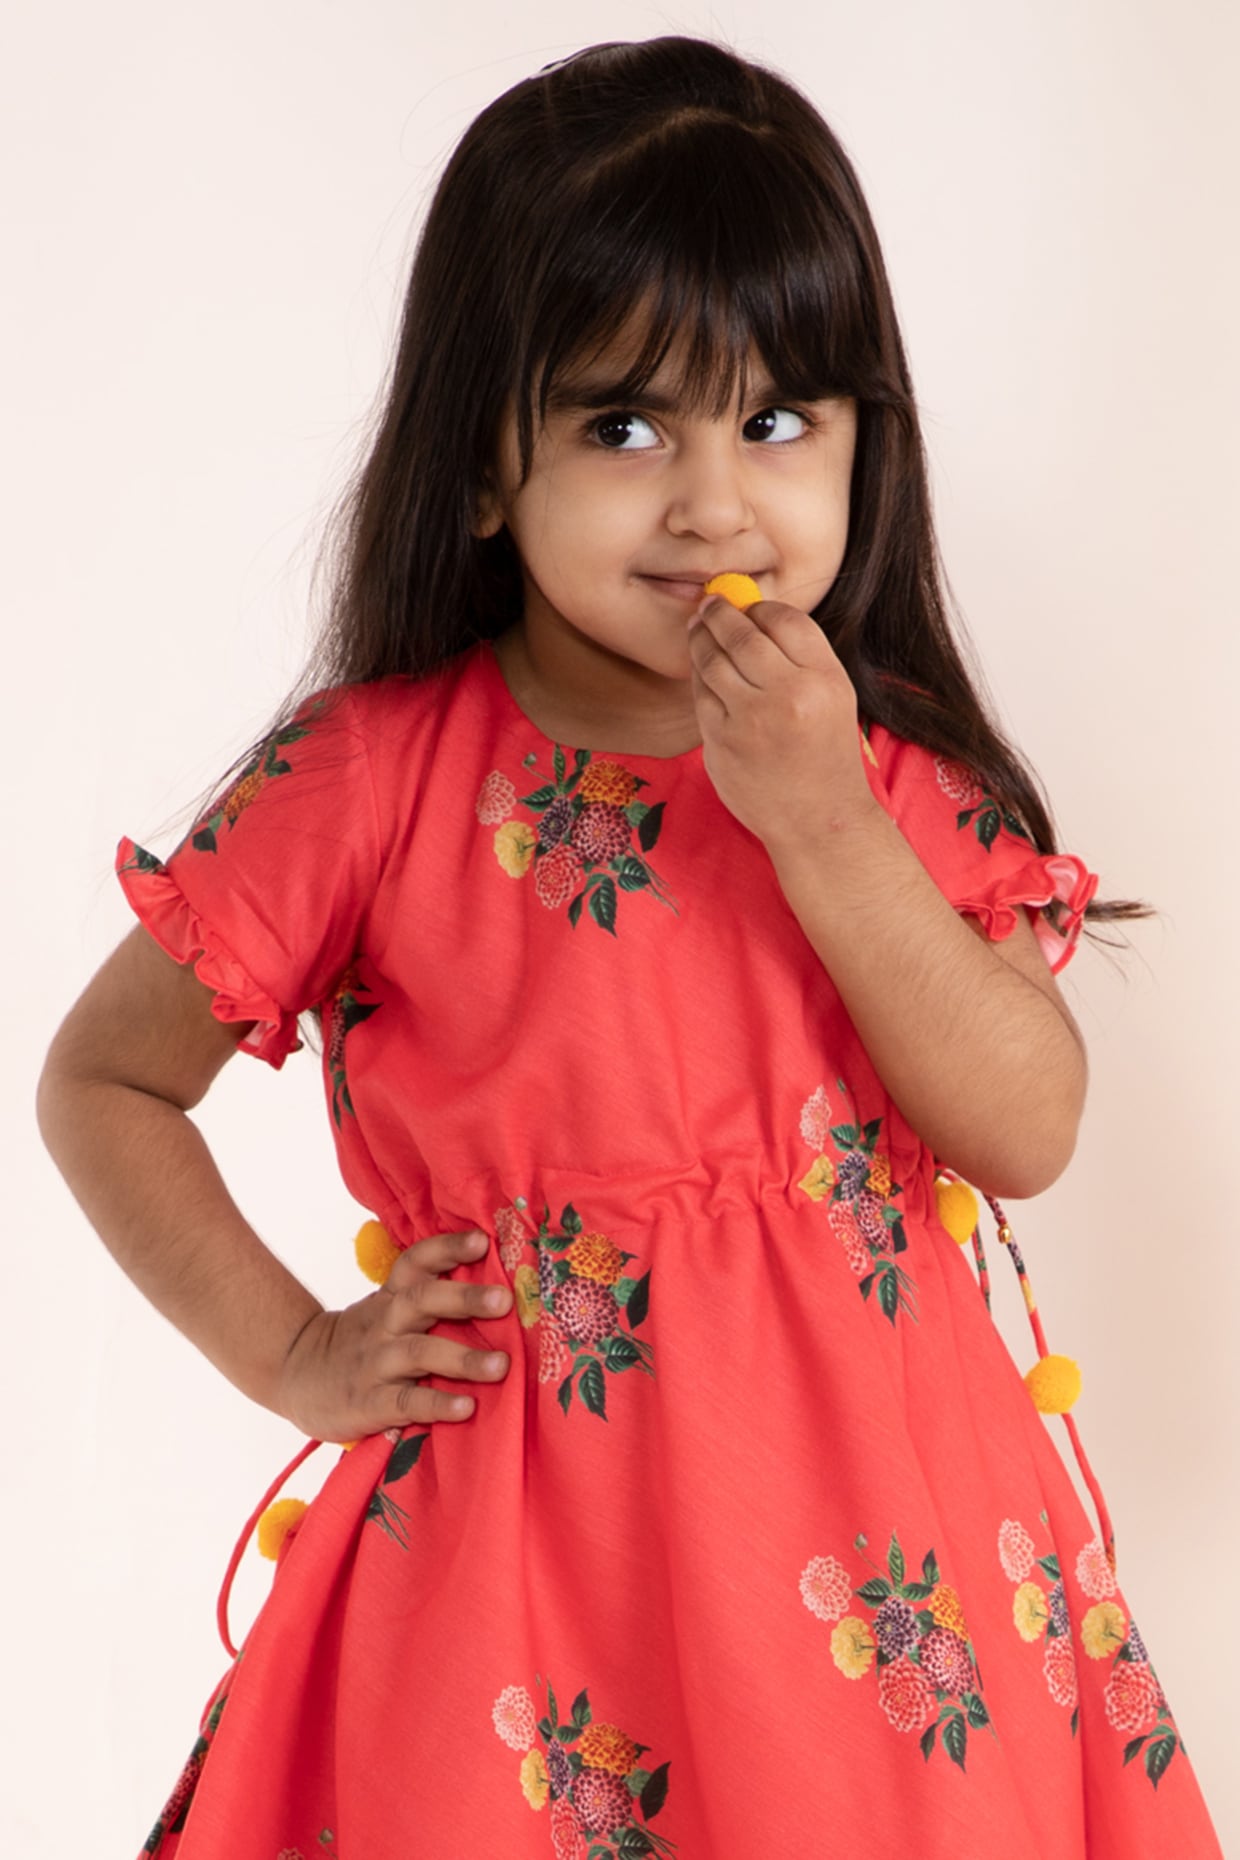 Blue Printed Sling Cake Cotton Princess Dress For Toddler Girls 2020 Summer  Collection Teenager Clothes 2 12 Years HE Hello Enjoy Q0716 From Sihuai04,  $8.49 | DHgate.Com